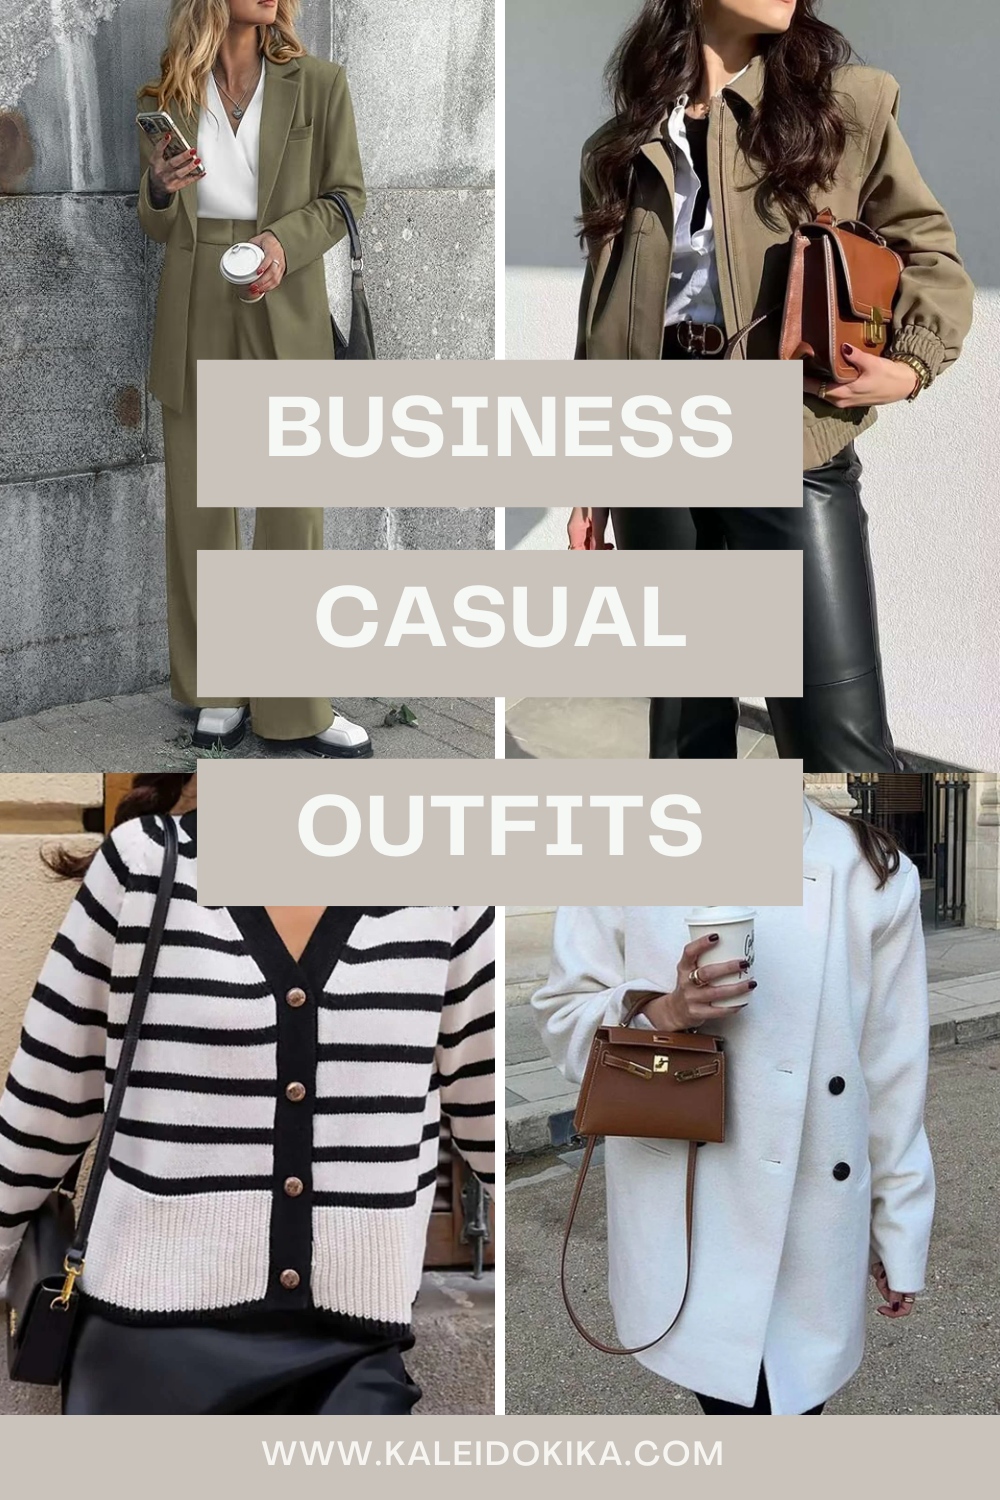 Image showing 30 outfit ideas for a business casual style